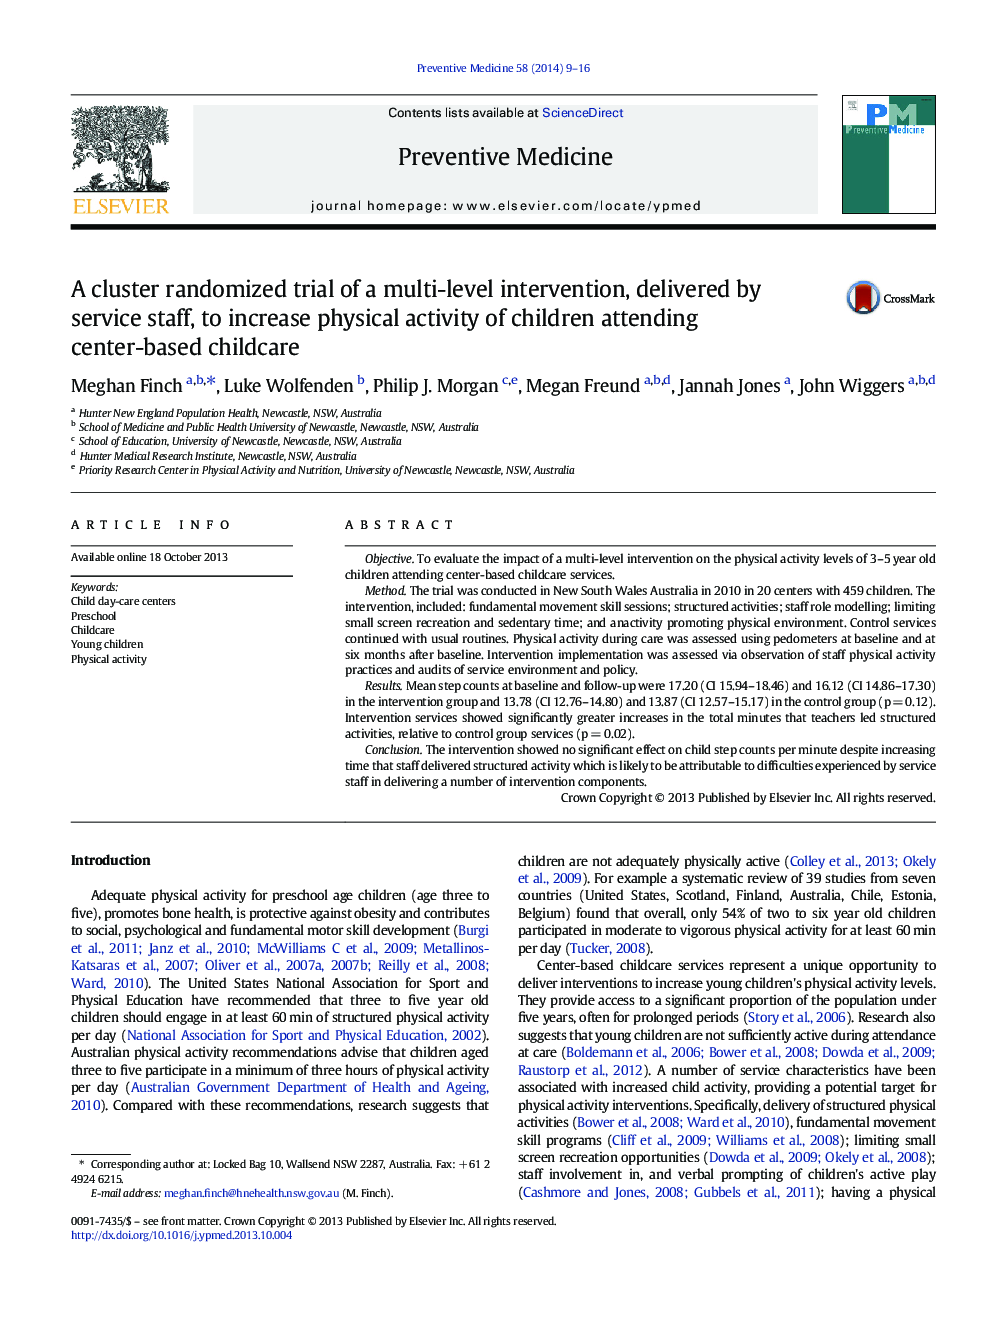 A cluster randomized trial of a multi-level intervention, delivered by service staff, to increase physical activity of children attending center-based childcare